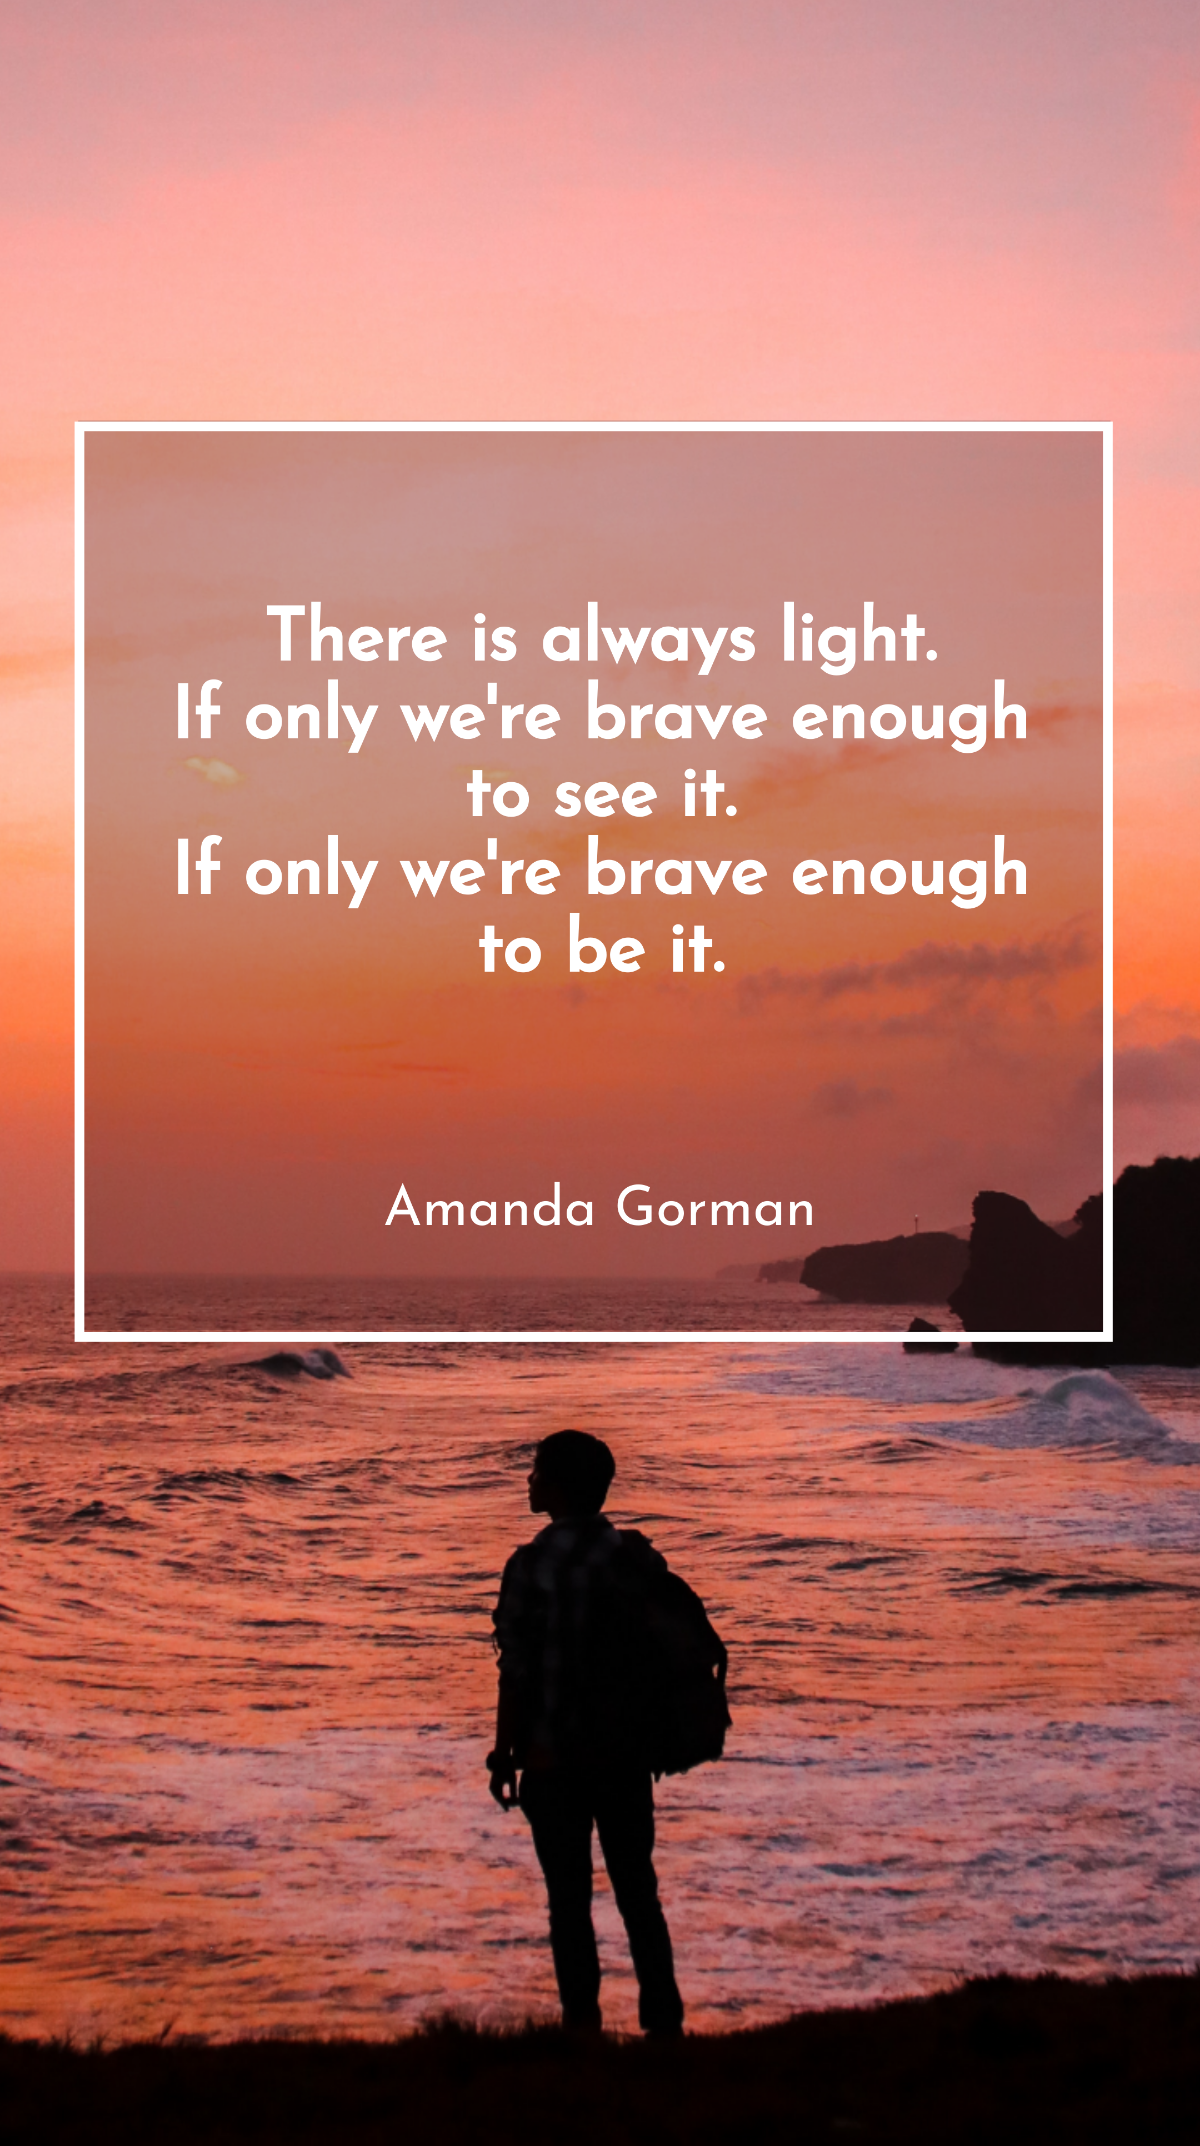 Amanda Gorman - There is always light. If only we're brave enough to see it. If only we're brave enough to be it